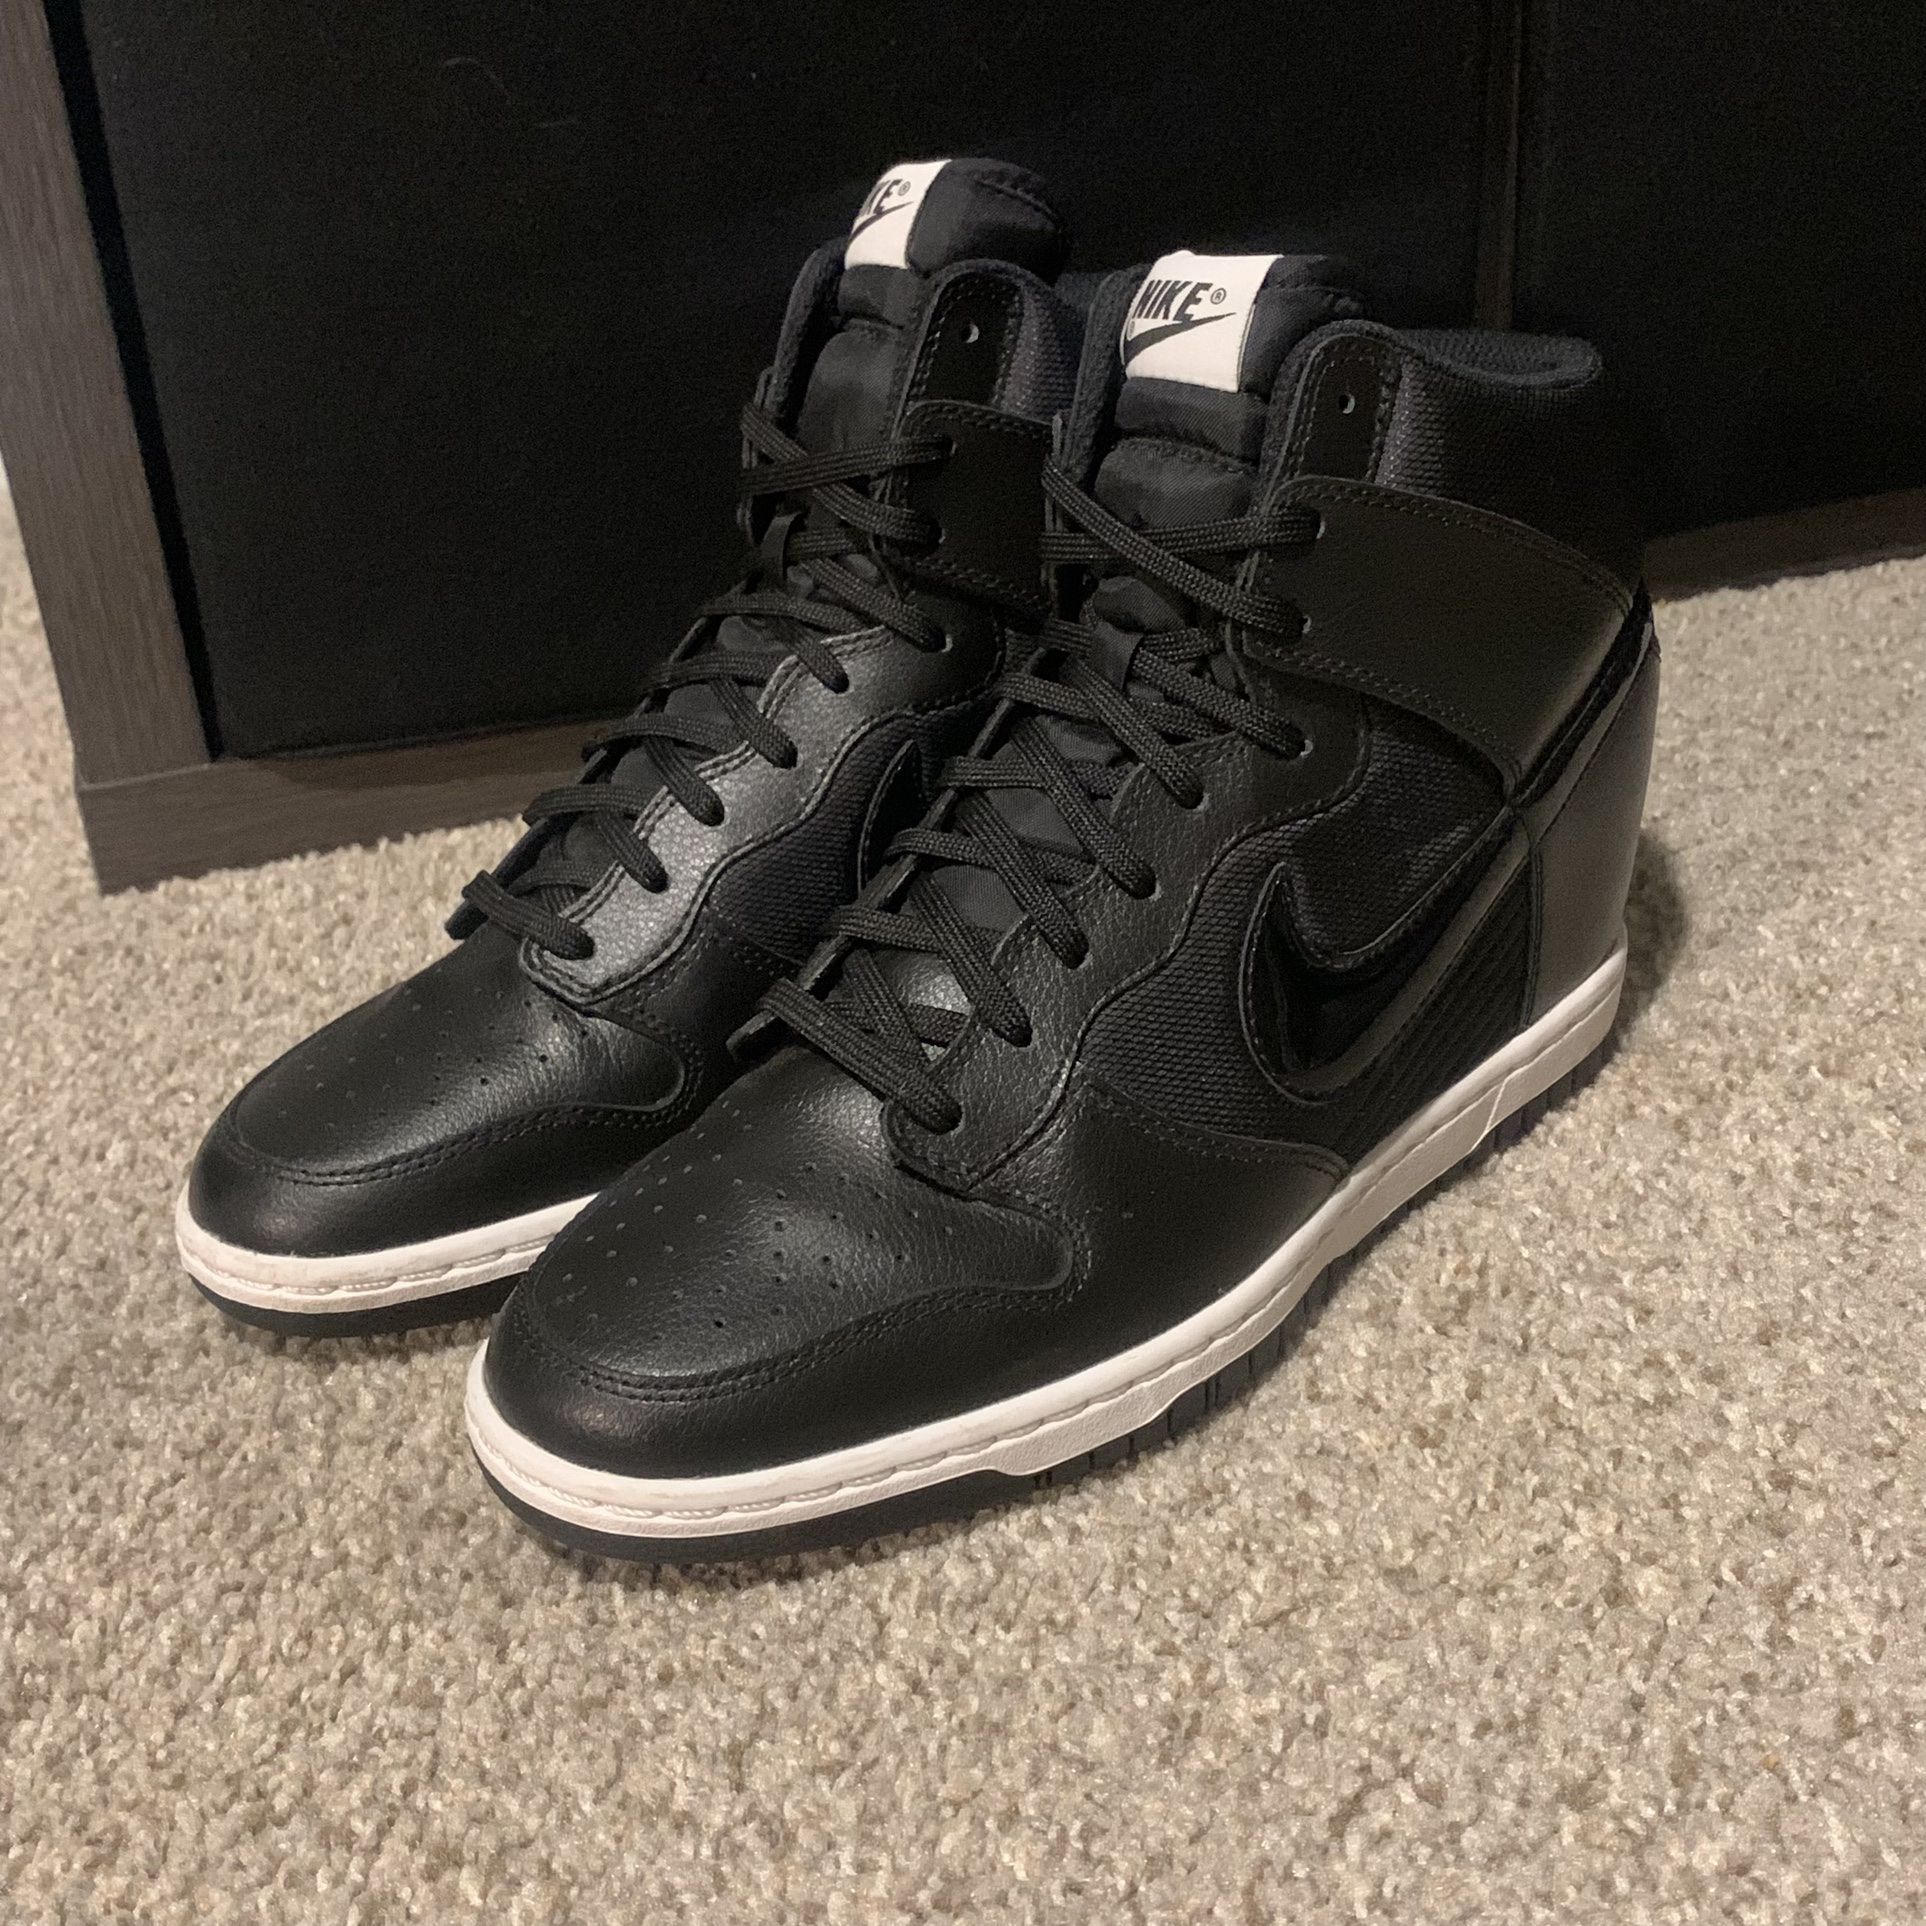 Supermarked Diktat læsning Nike Dunk Sky High Essential Women's Wedge Sneakers Size 10 Black  644877-008 for Sale in Rockville, MD - OfferUp